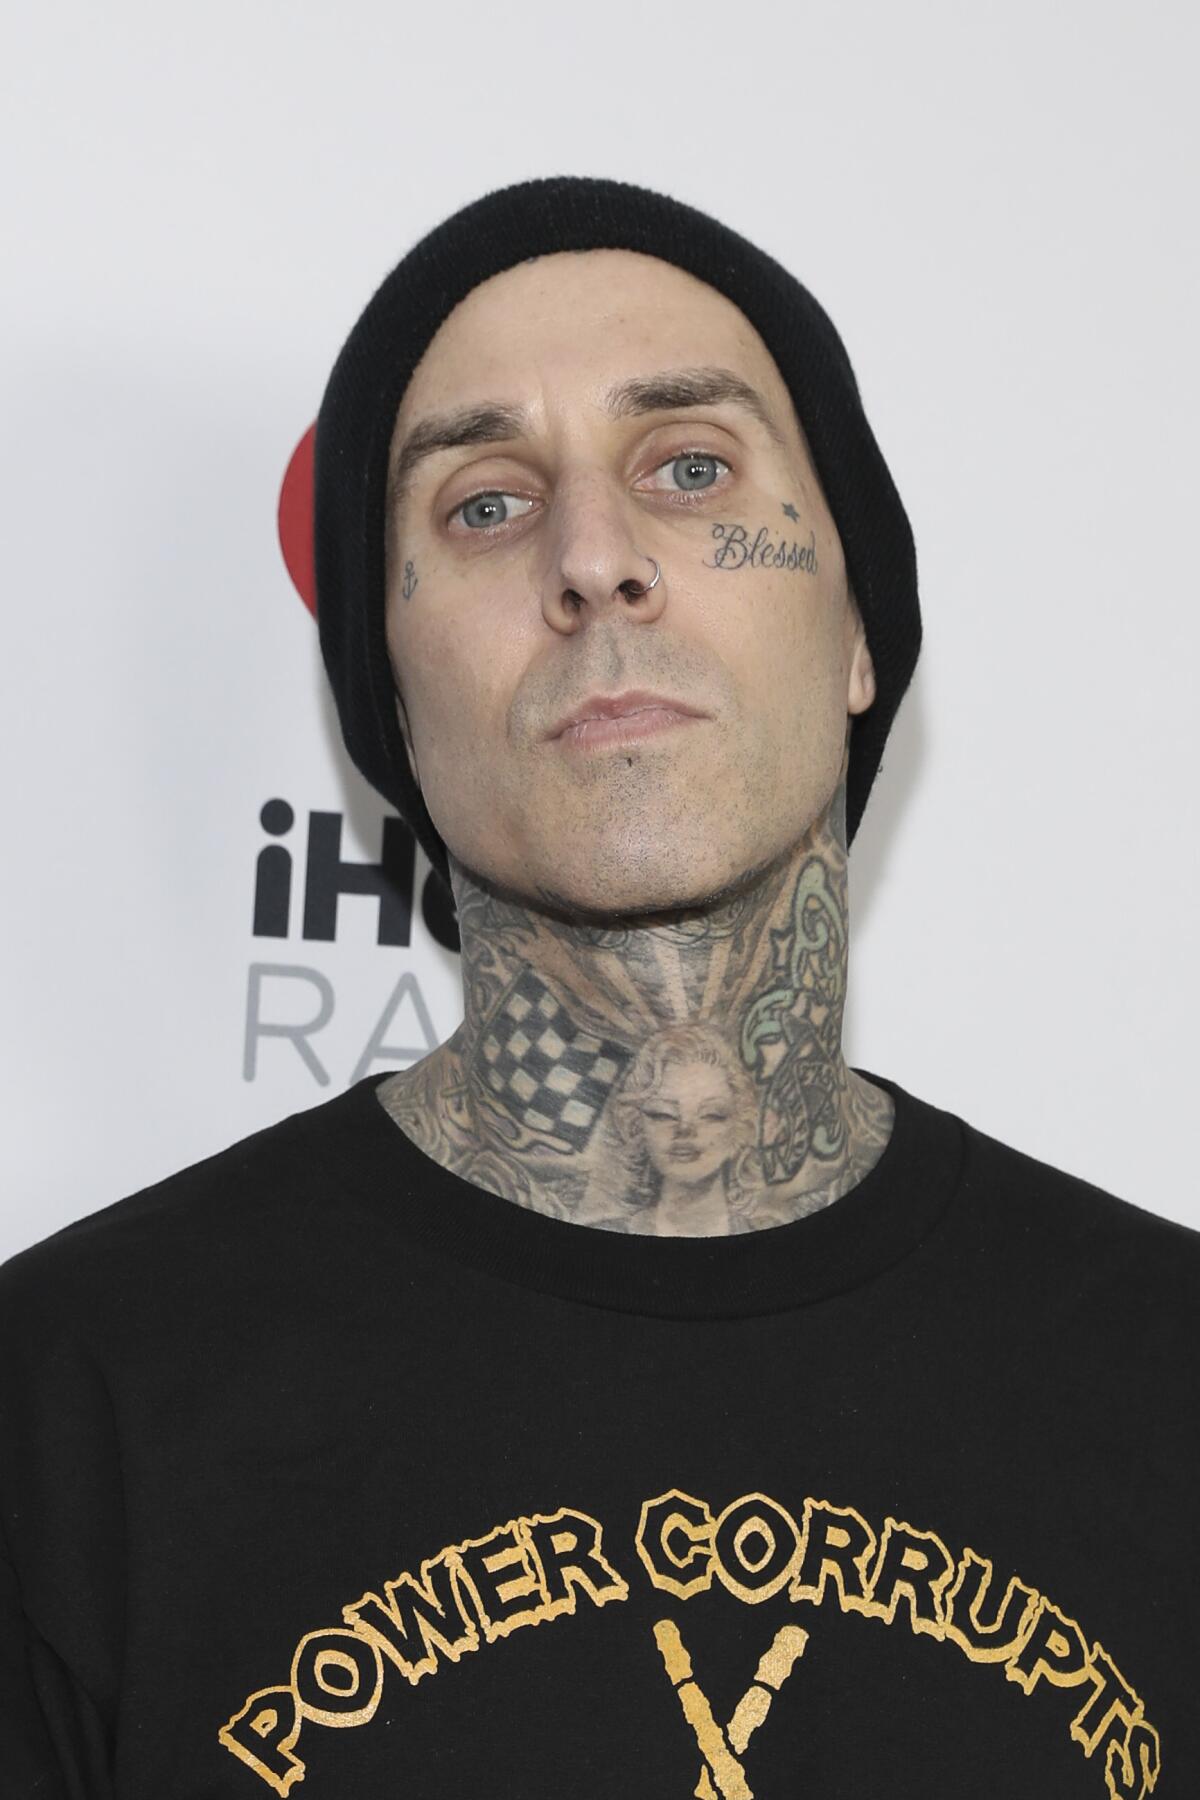 A man, wearing a black T-shirt and beanie, poses for photos. He has tattoos on his face and neck. 